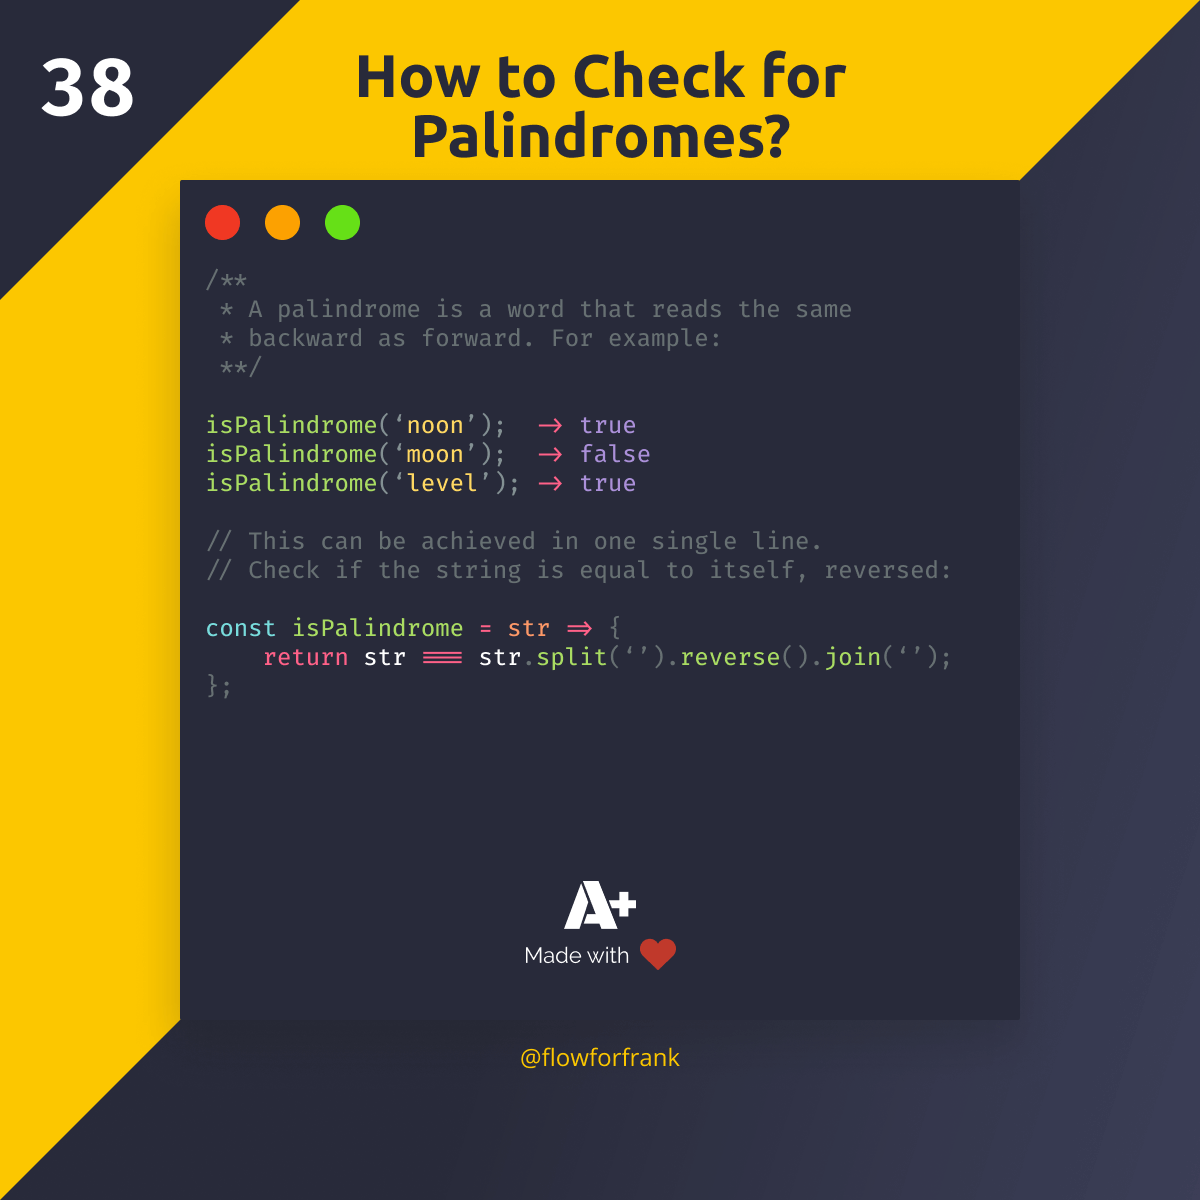 How to Check for Palindromes in JavaScript